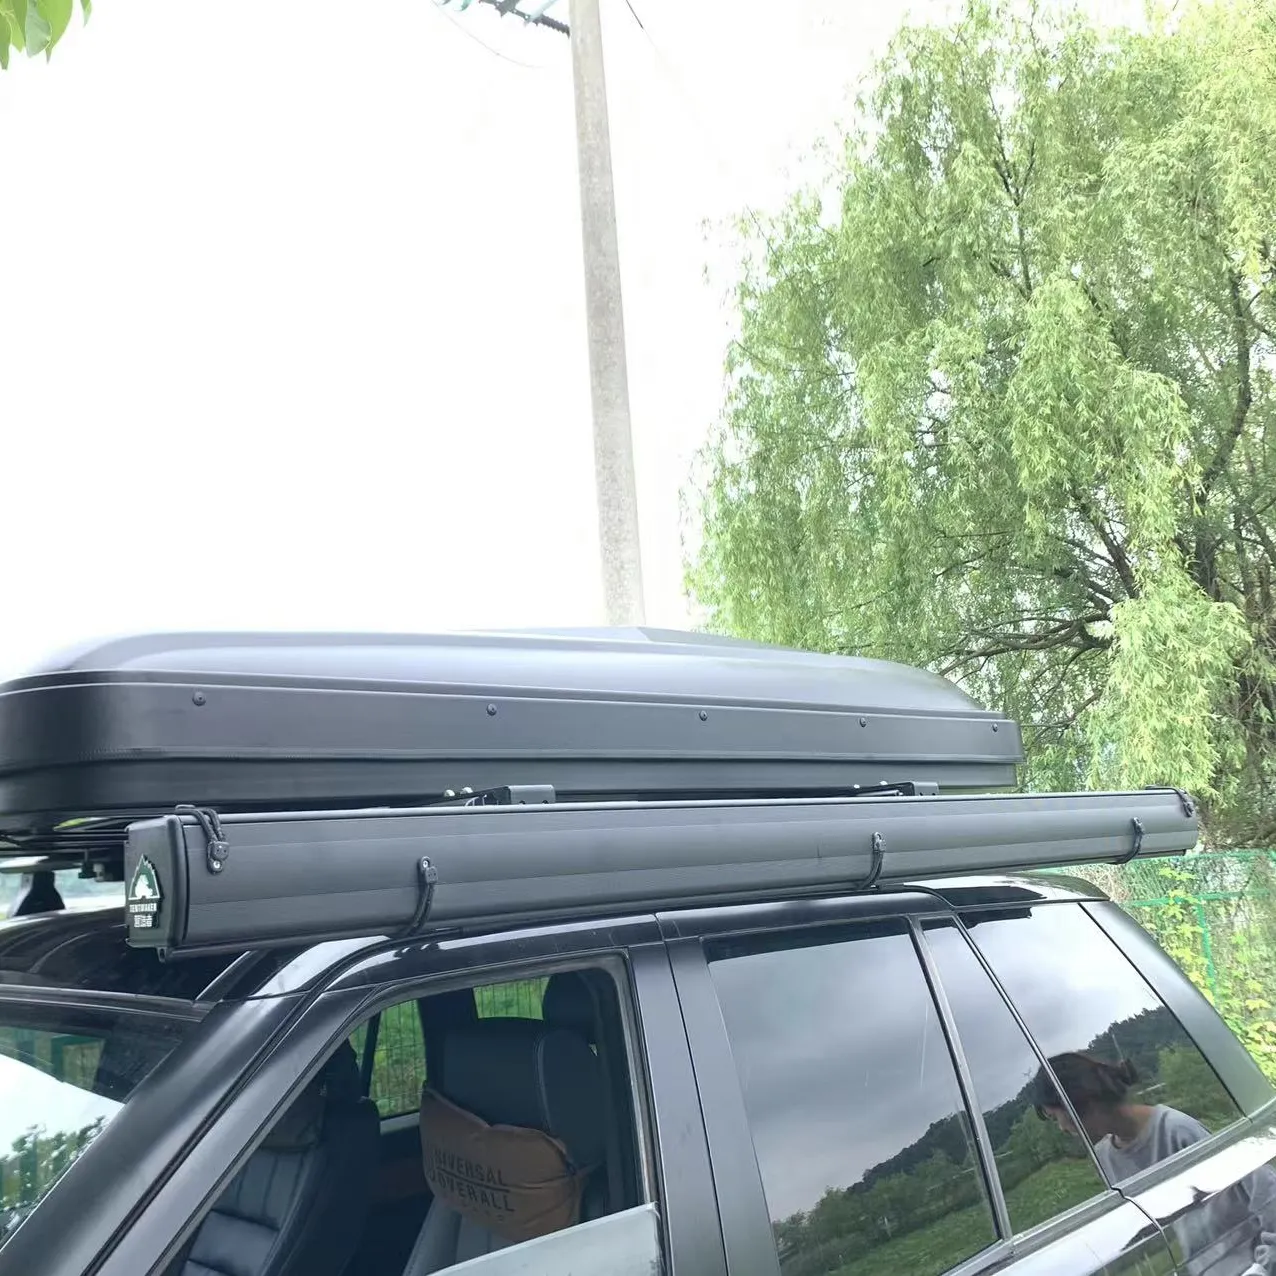 Free Sample Car Side Retract Awning For Camping With Aluminum pole awning for car